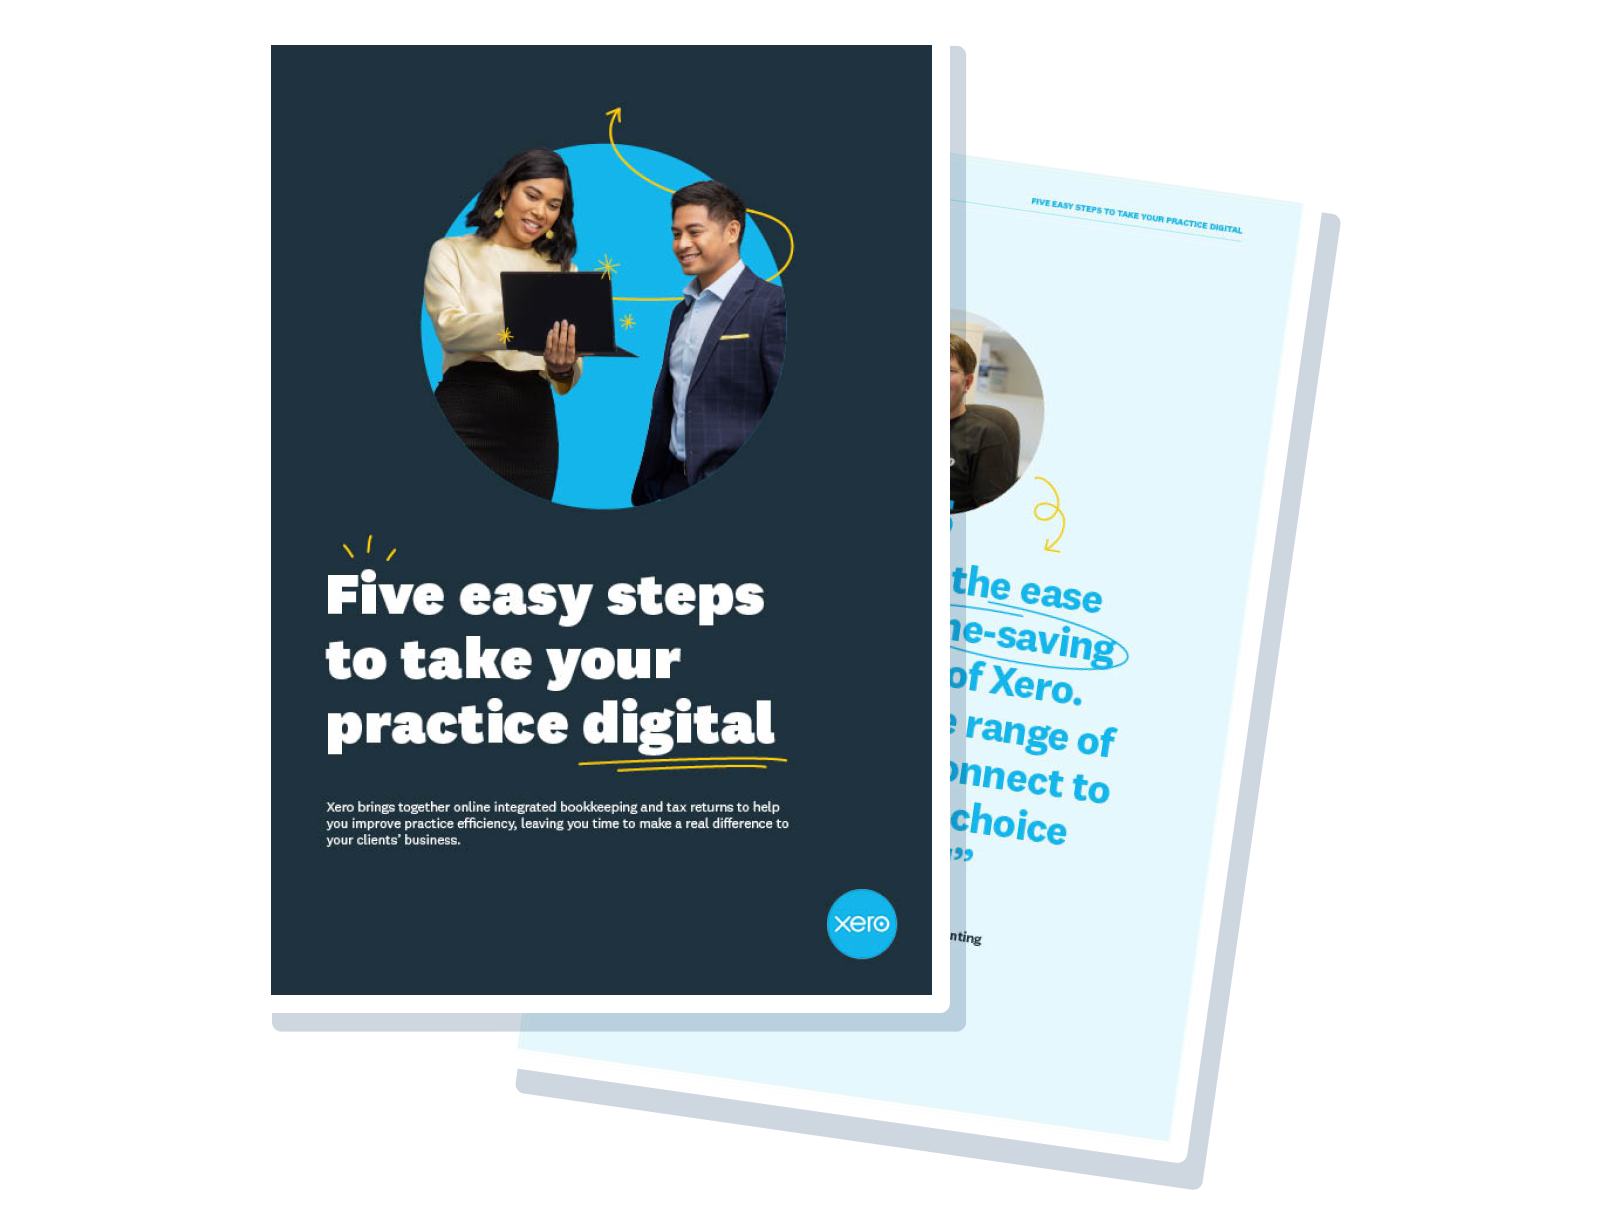 Five easy steps to take your practice digital